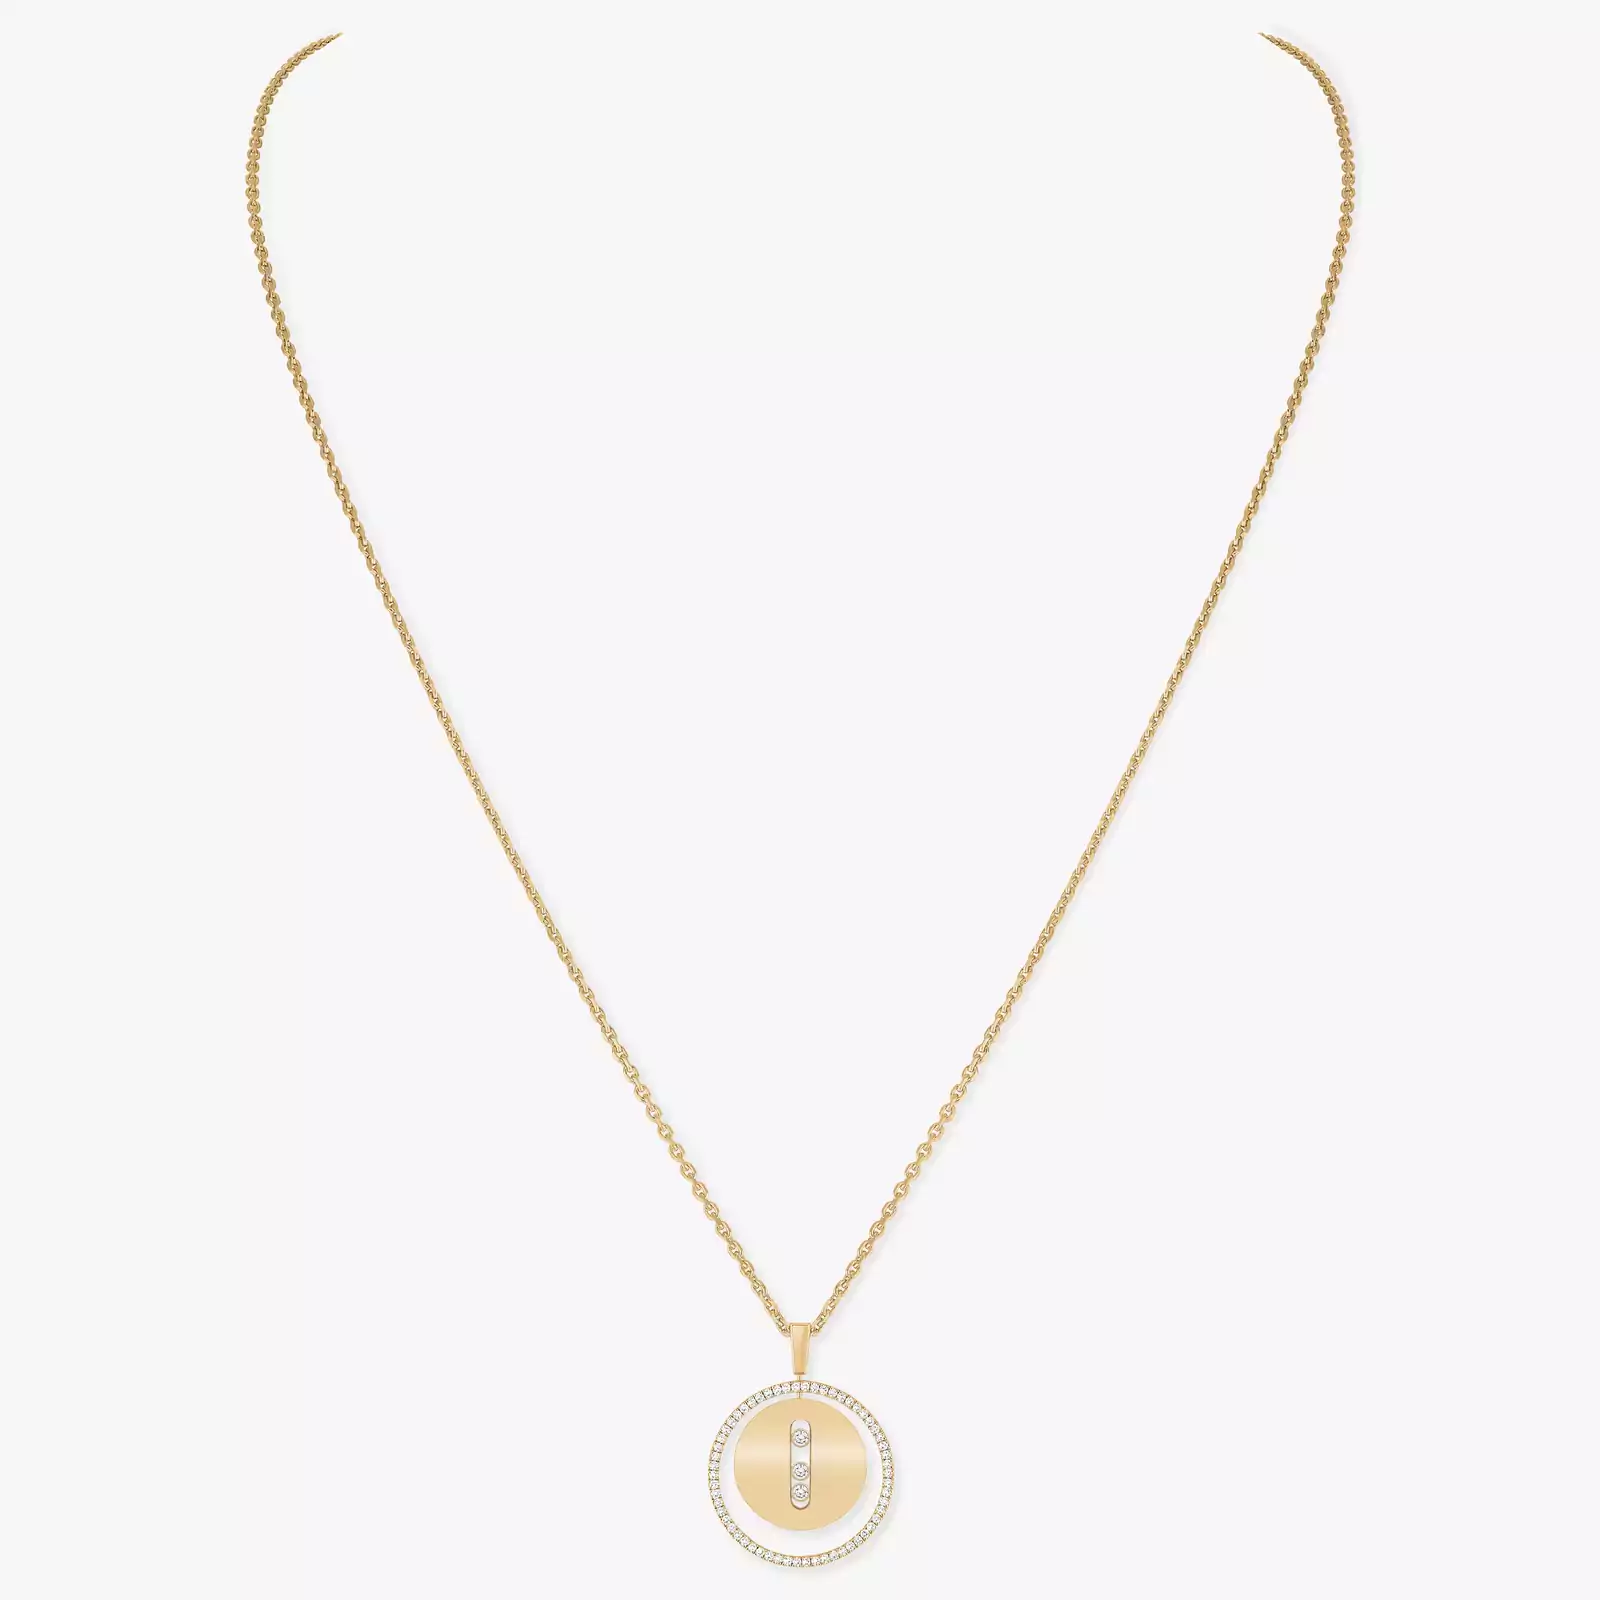 Collier Femme Or Jaune Diamant Lucky Move MM 07394-YG